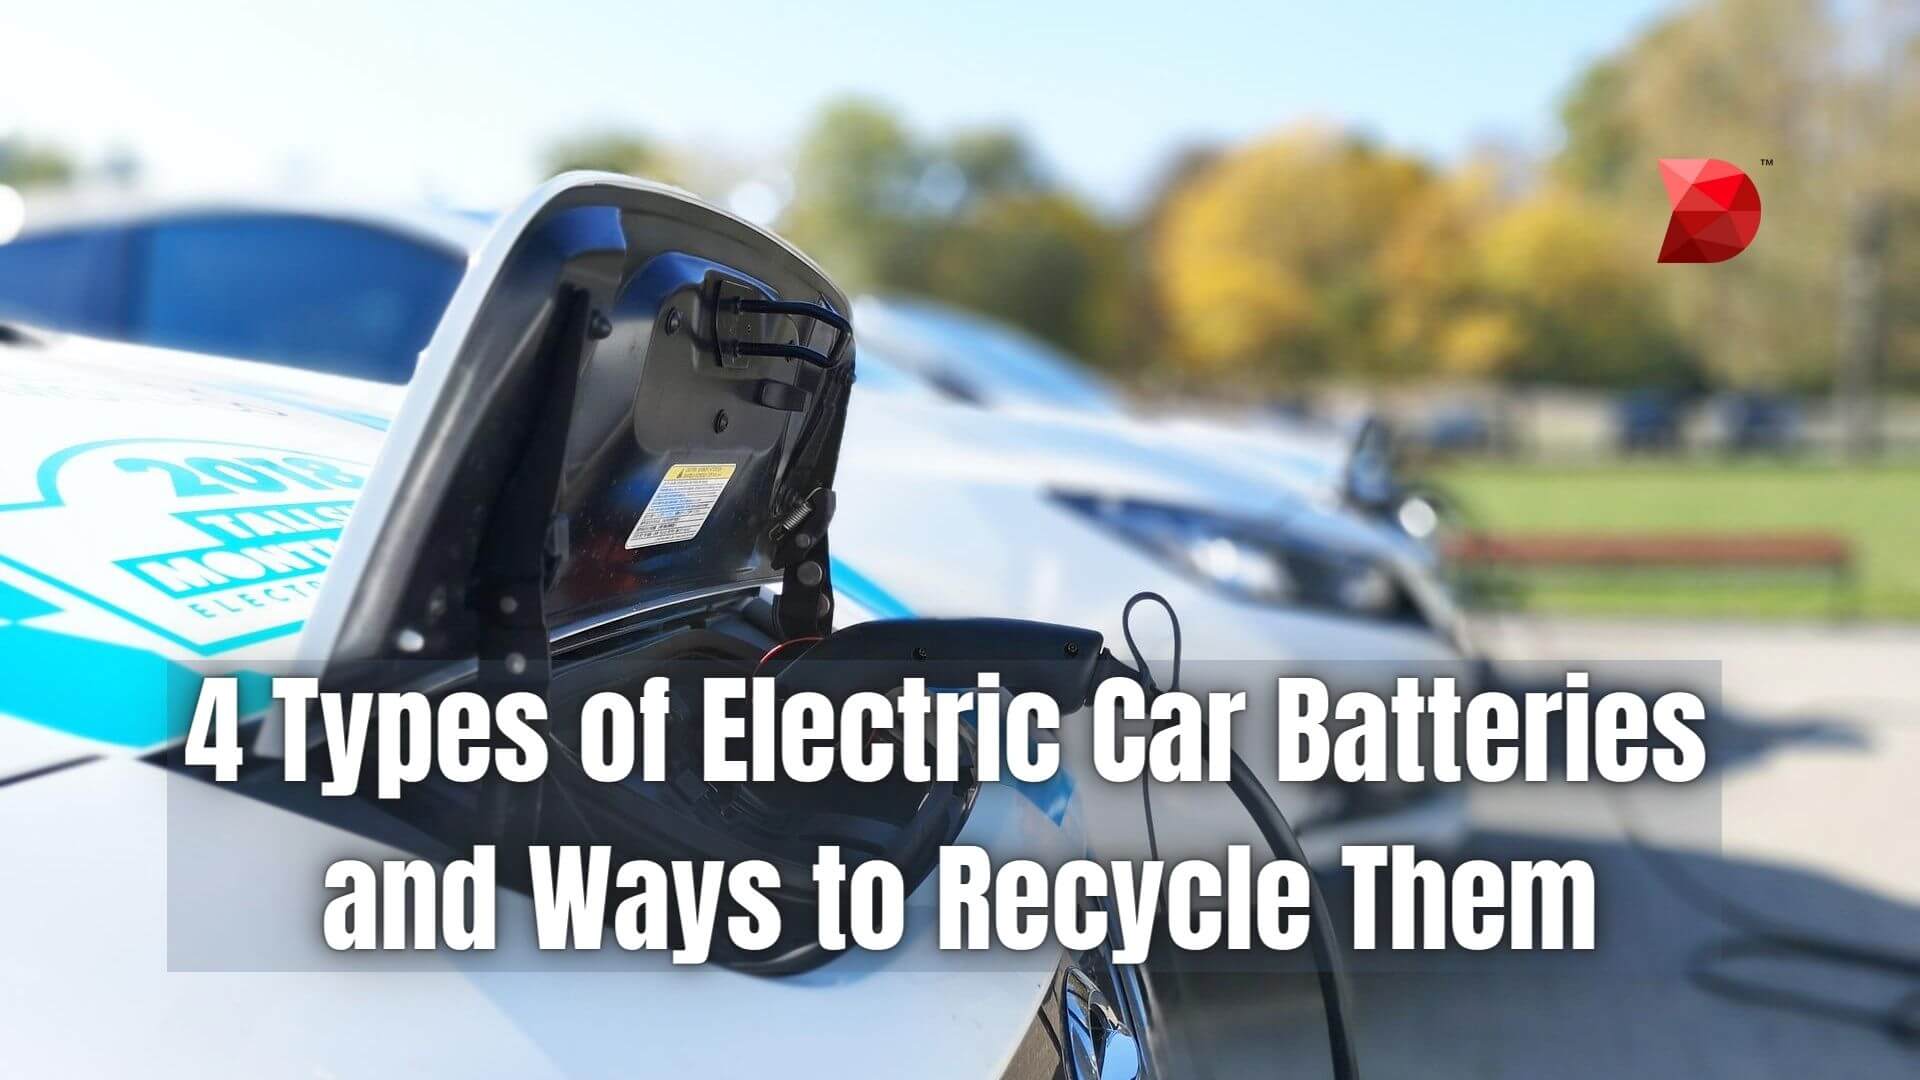 4 Types of Electric Car Batteries and Ways to Recycle Them